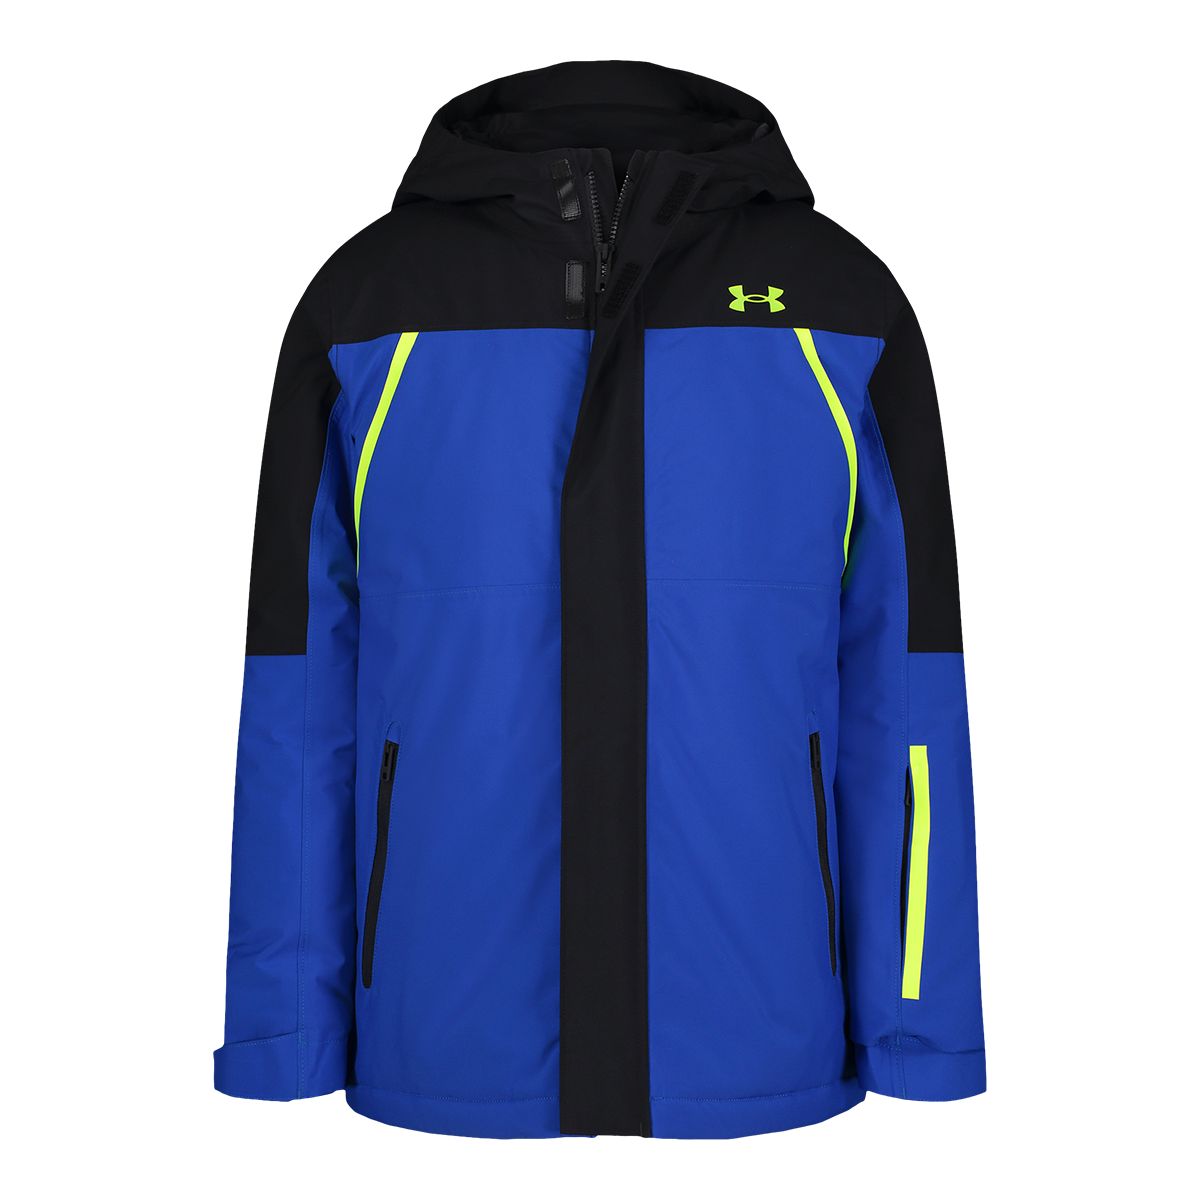 Under Armour Boys' J2 Insulated Waterproof Jacket